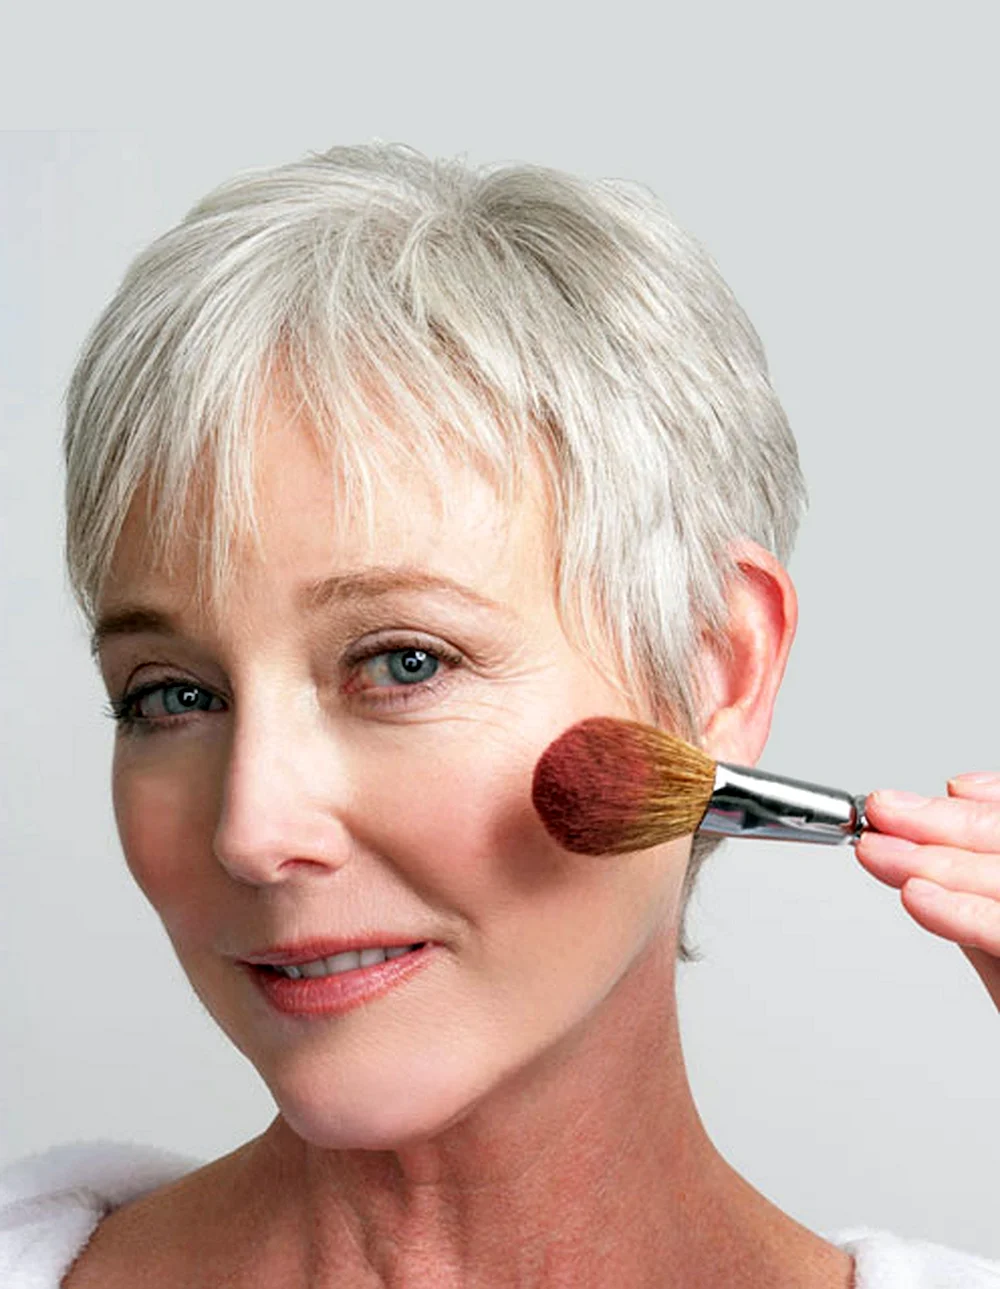 Makeup for women 50 years old